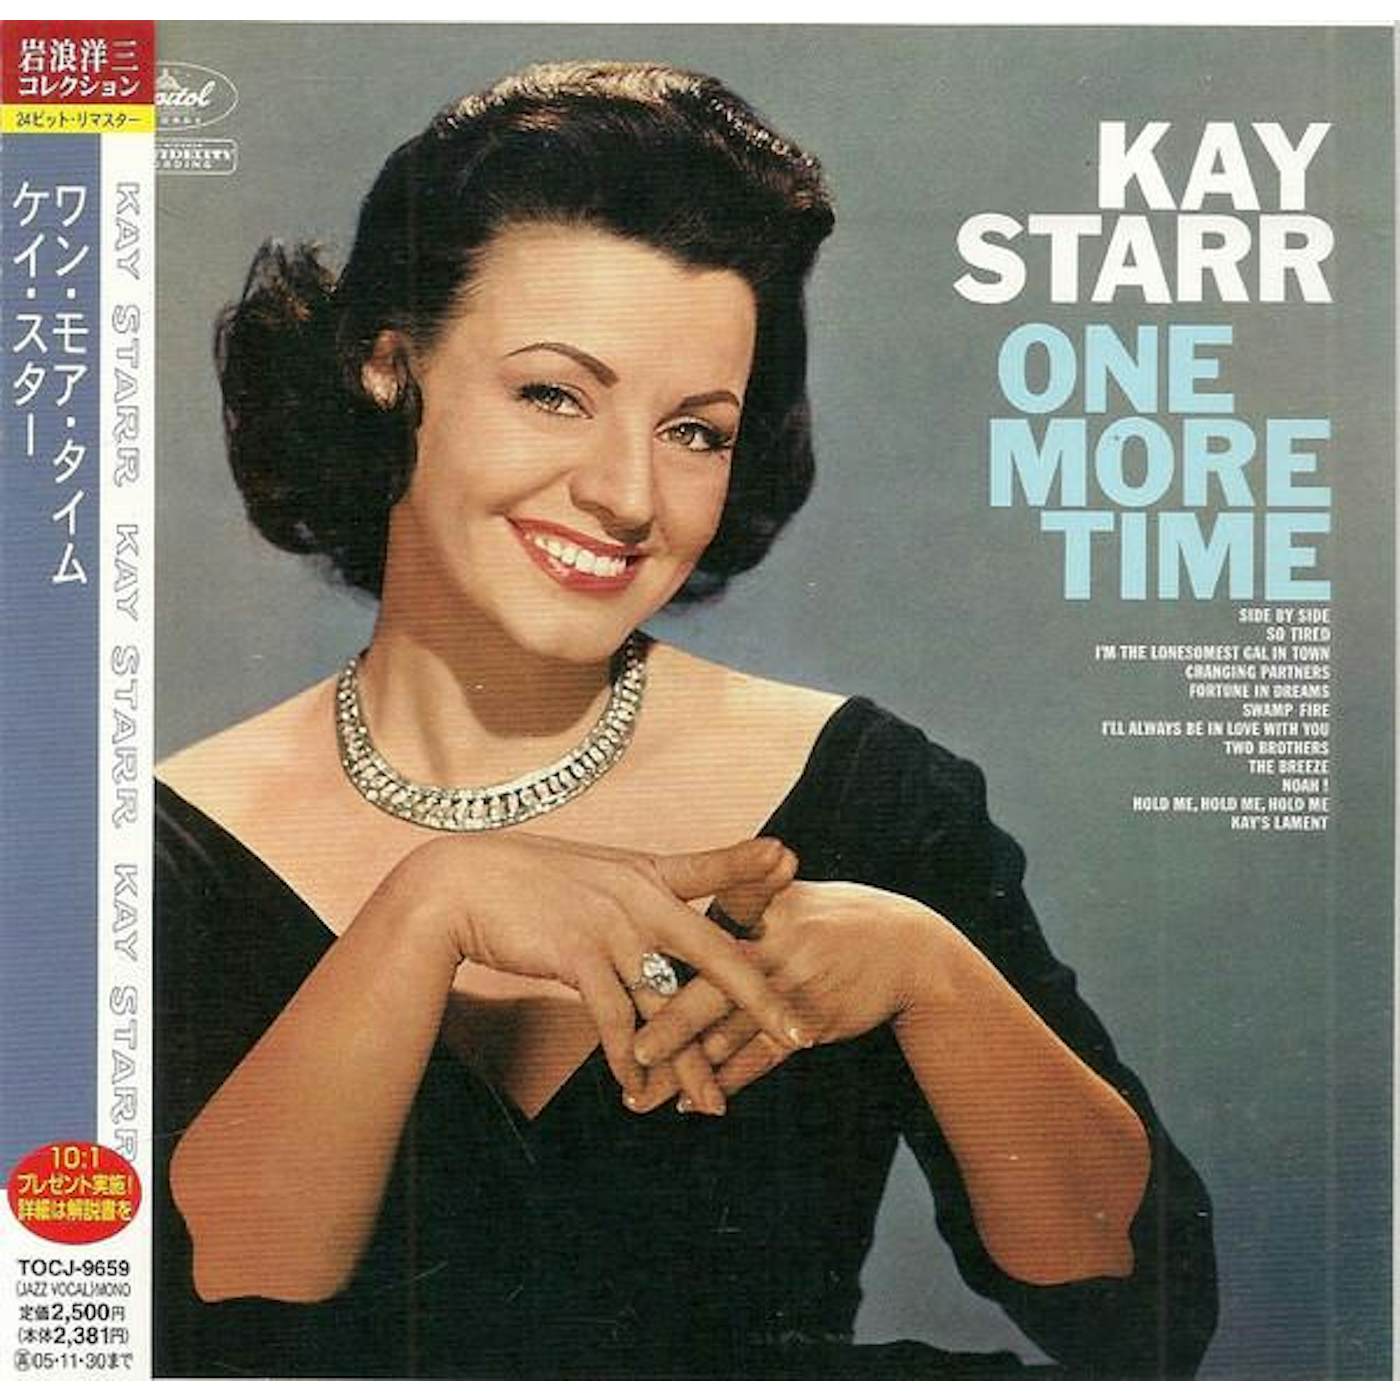 Kay Starr ONE MORE TIME CD